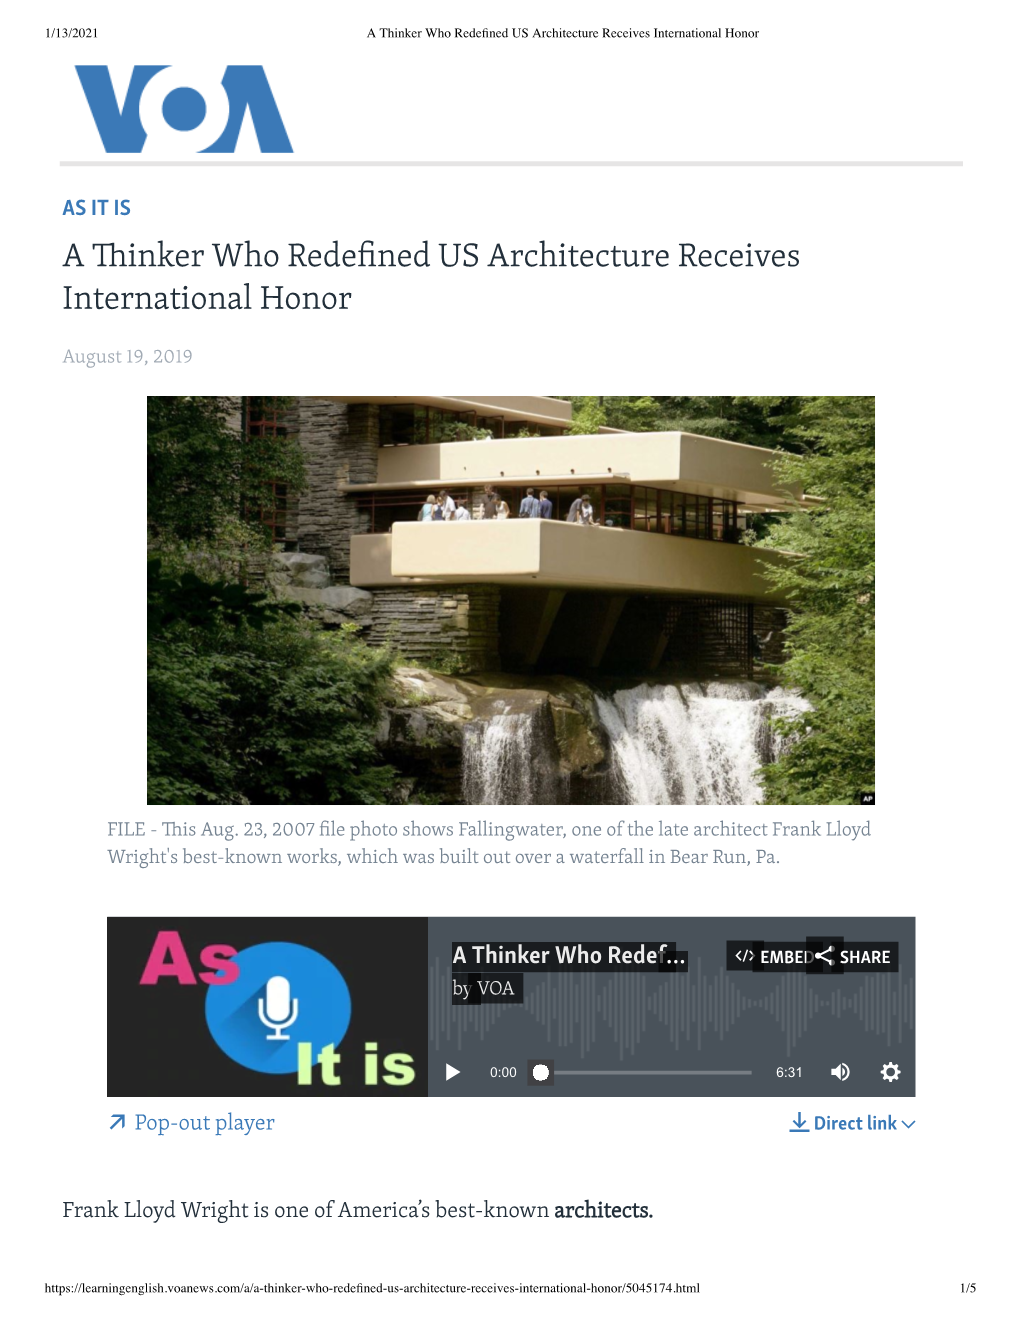 A Inker Who Rede Ned US Architecture Receives International Honor